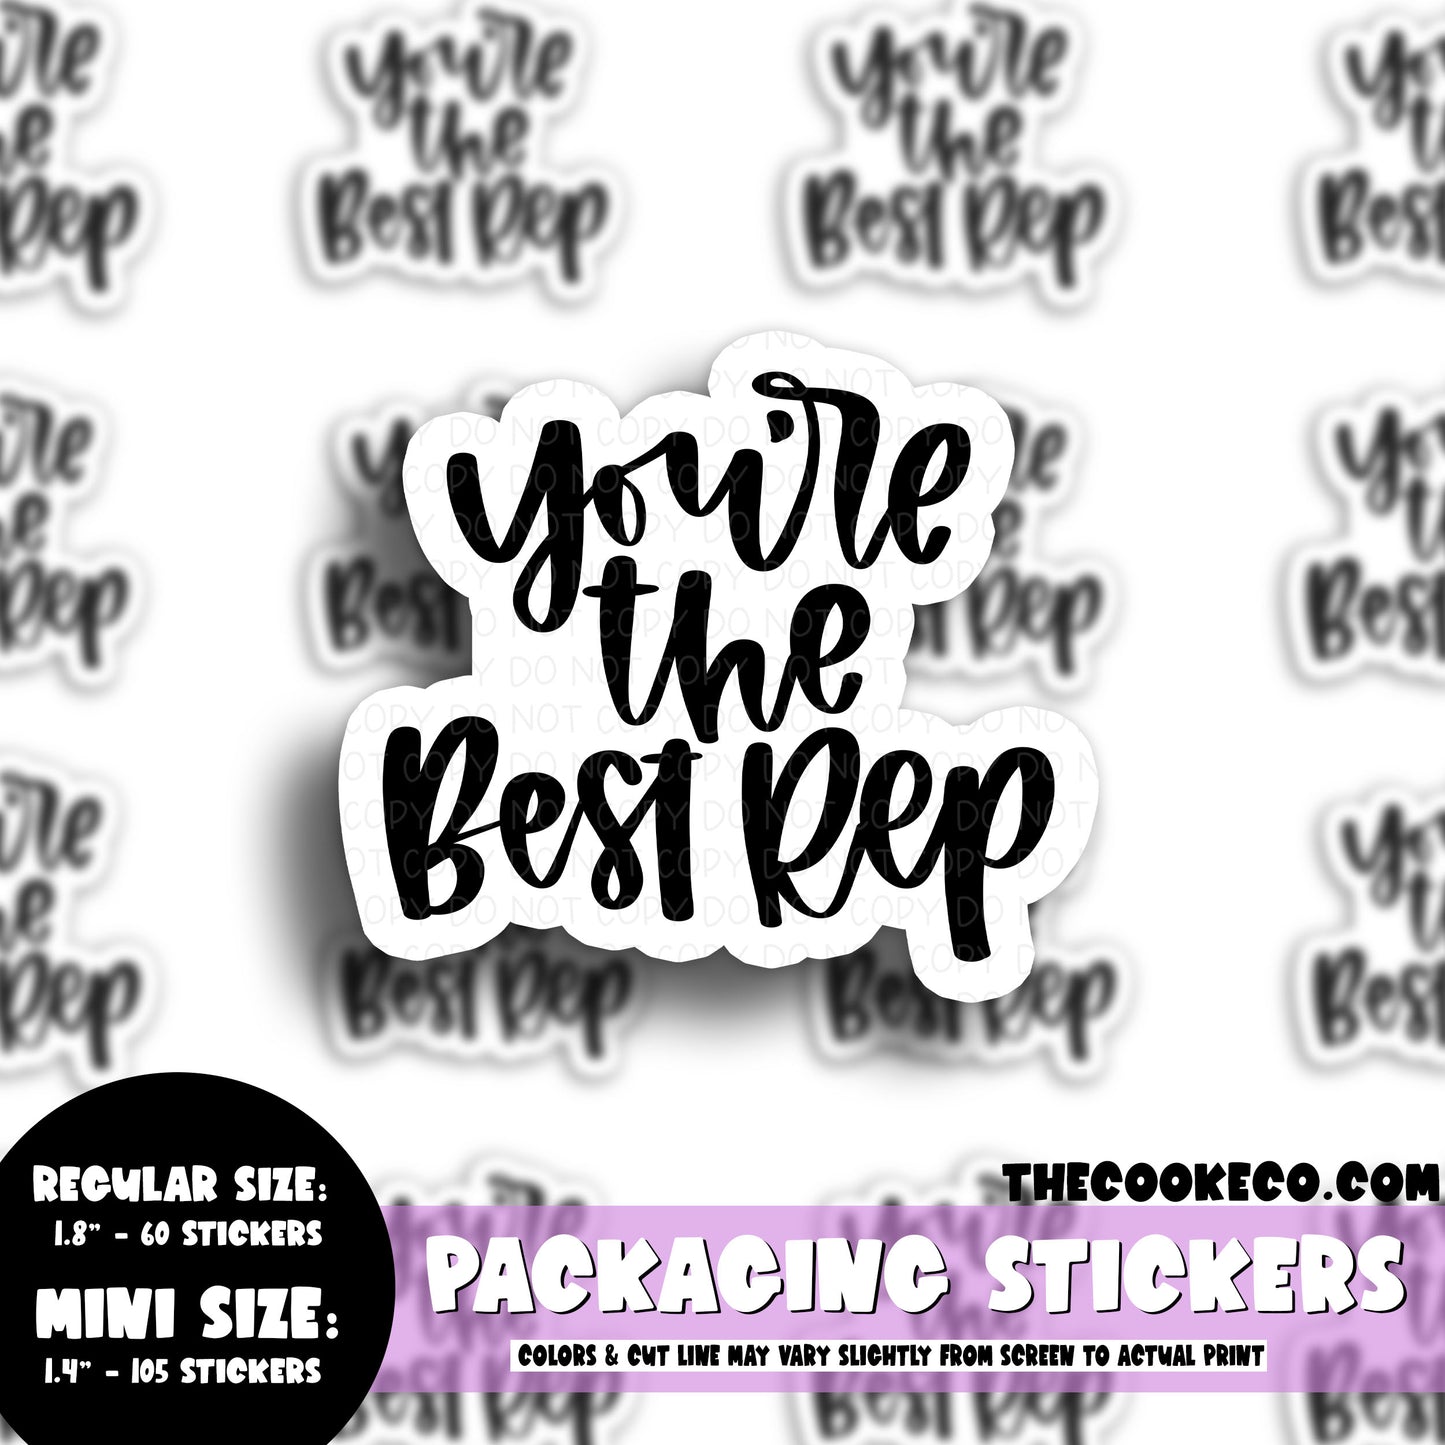 PTO Packaging Stickers | #BW0194 - YOU'RE THE BEST REP